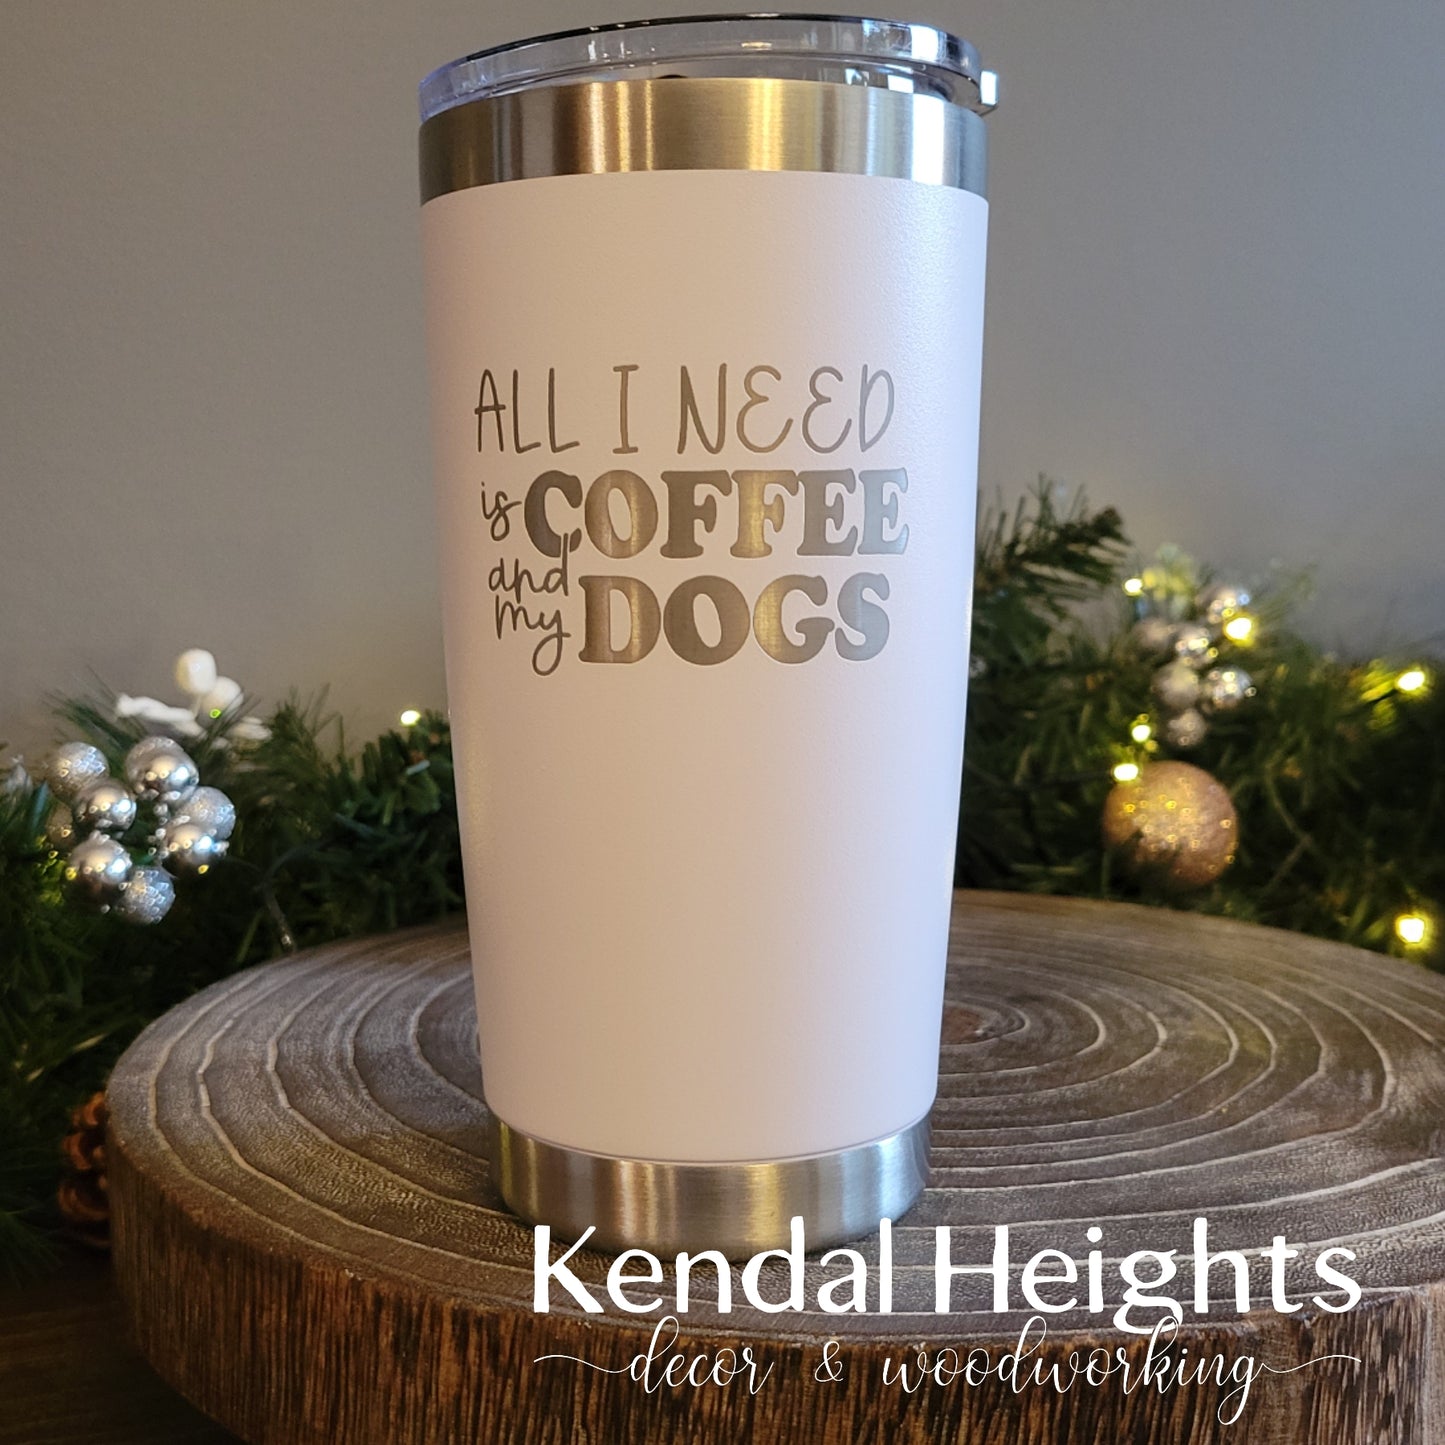 Stainless Steel Etched Tumblers